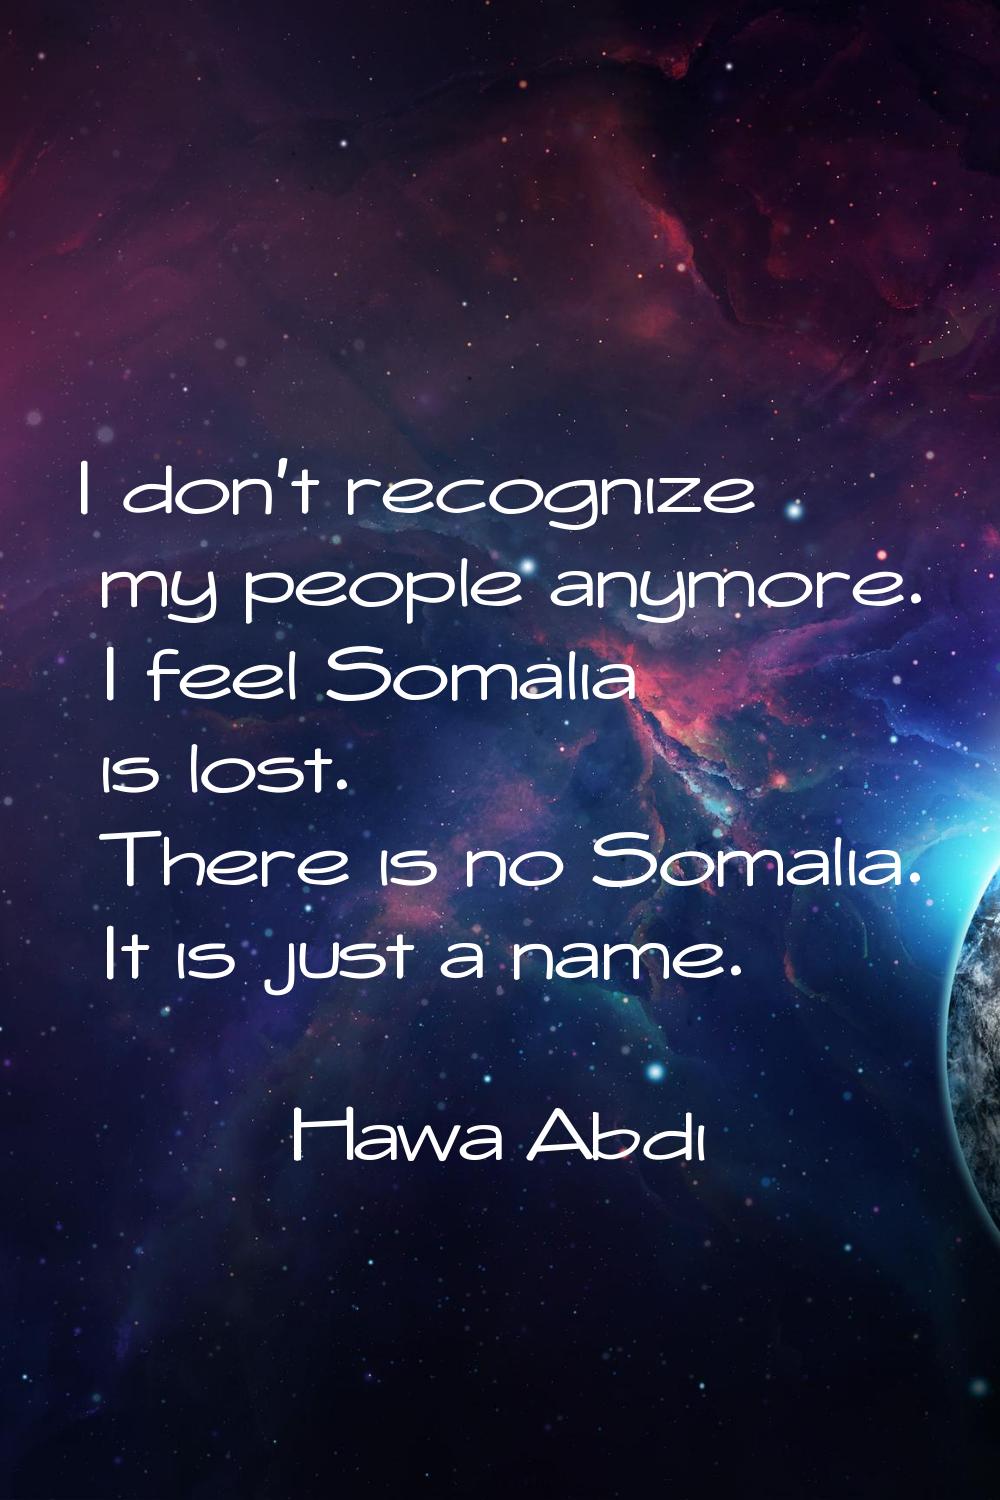 I don't recognize my people anymore. I feel Somalia is lost. There is no Somalia. It is just a name